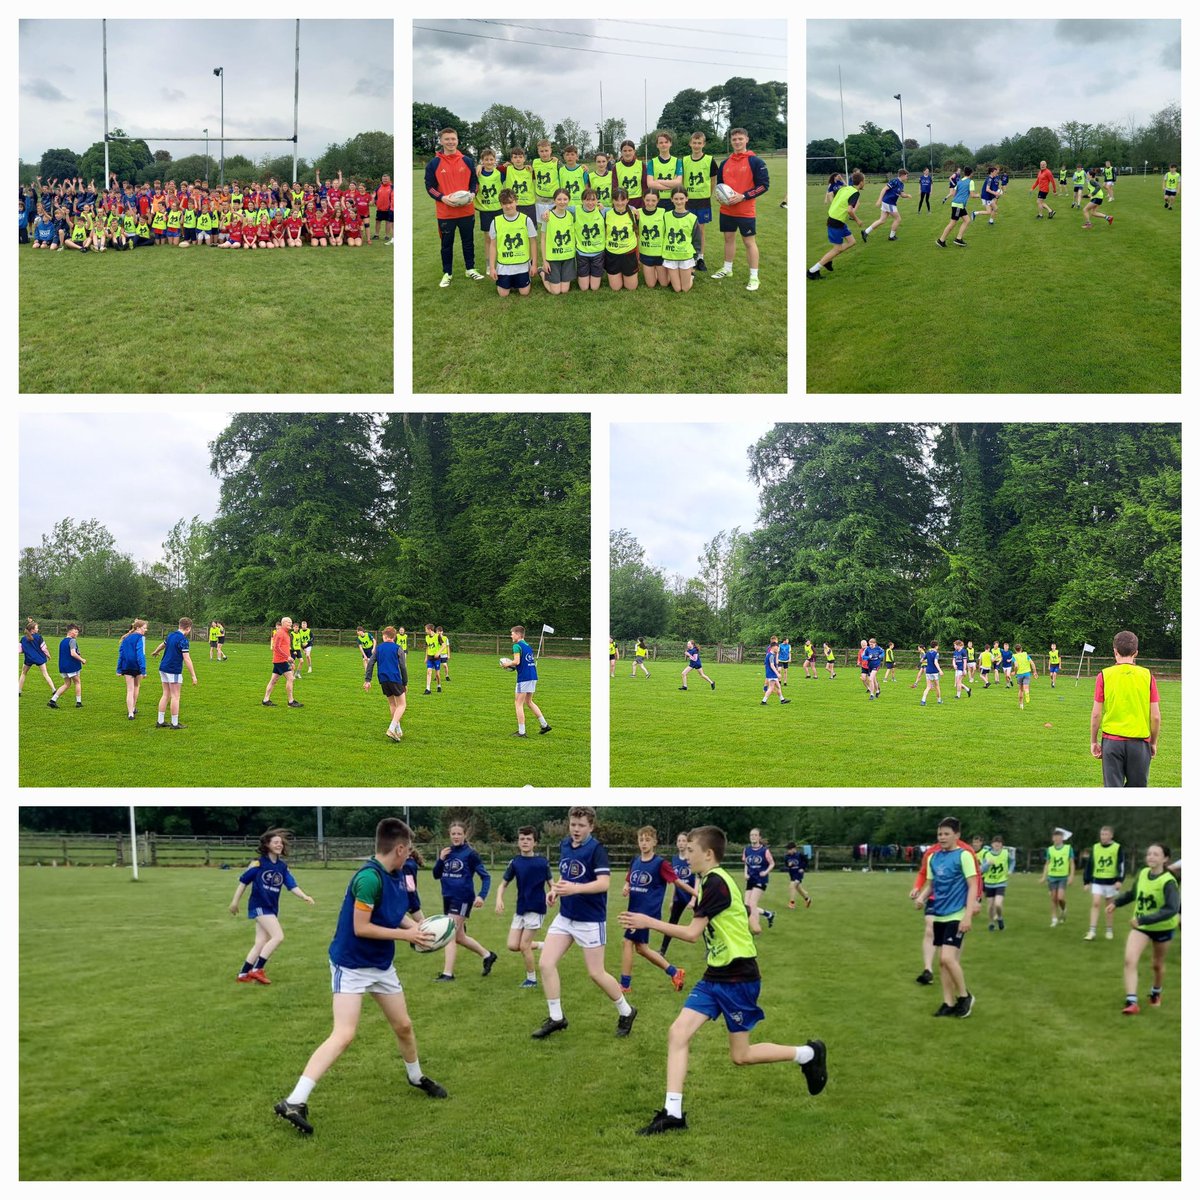 Go raibh míle to coaches @Munsterrugby and @BallinaKillalo1 for organising and hosting local primary schools for a tag rugby blitz in Clarisford. Great fun! Great games! Looking forward to next year! @ActiveFlag @NenaghGuardian #inclusion